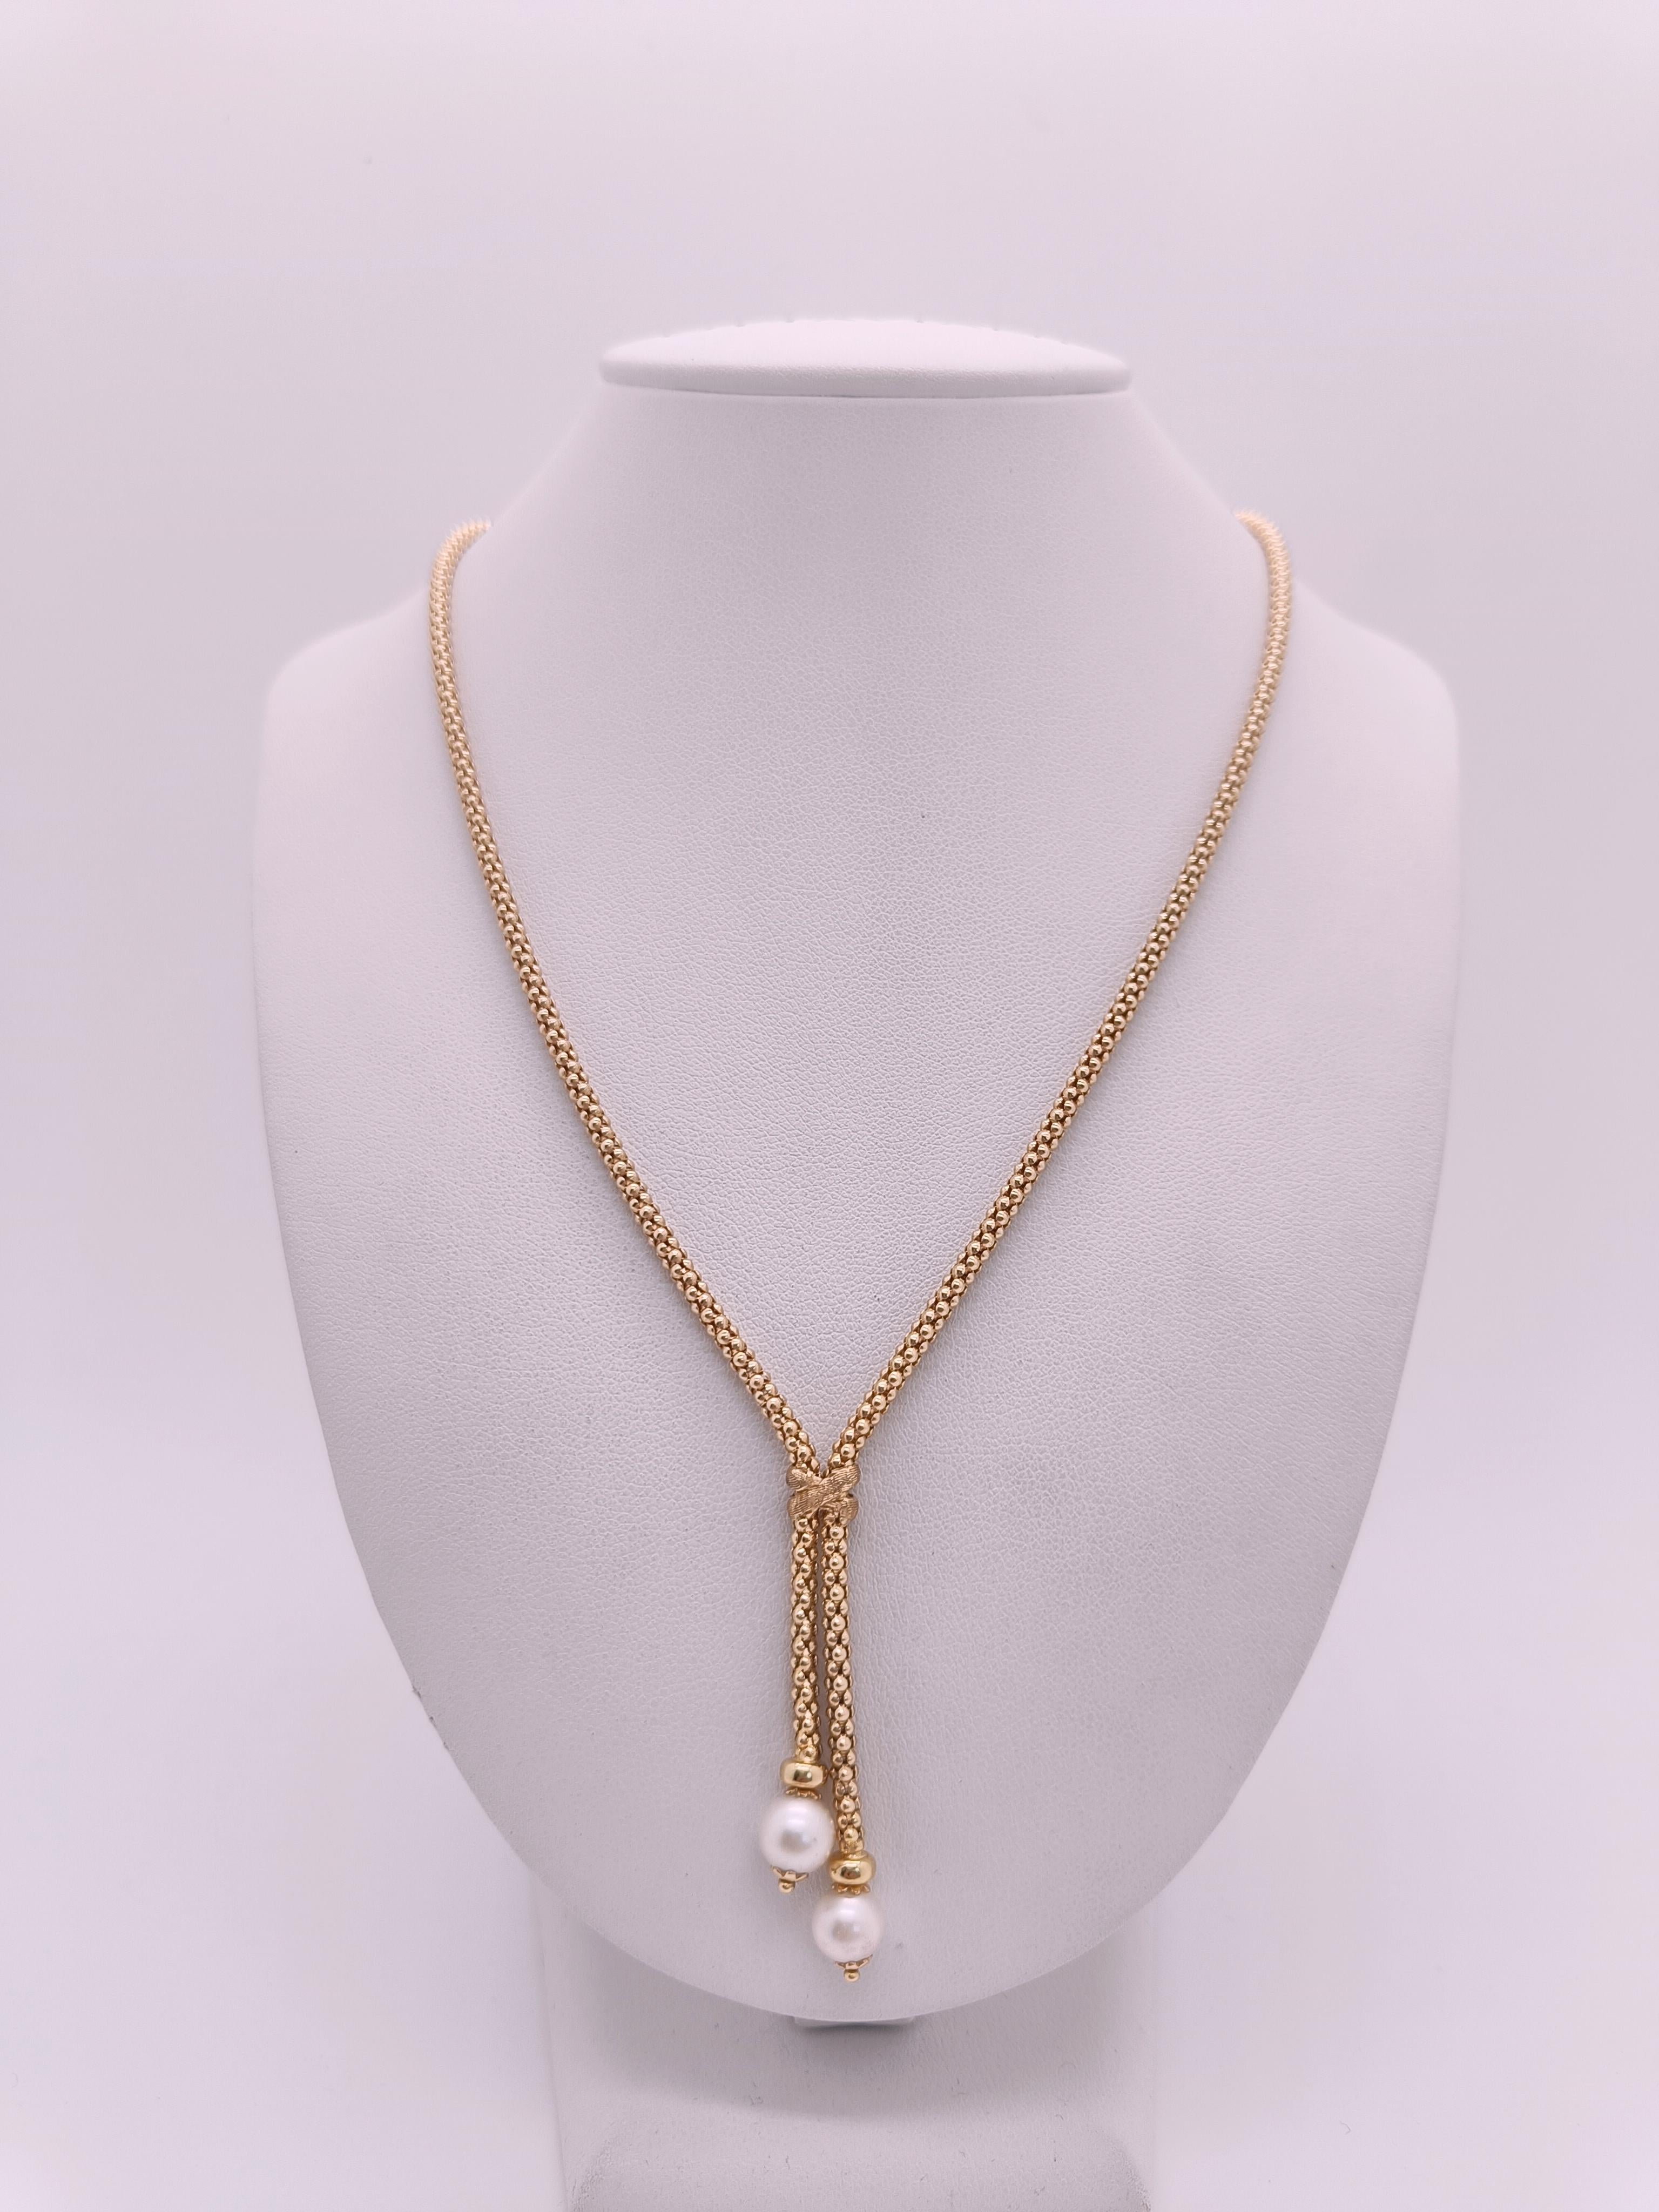 Choker necklace with two pendant tufts with Cultured Pearls.

Entirely made of 18k Gold, a beautiful round and durable mesh, shiny and elegant.
Details include a richly carved knot dividing the choker and tufts ending in two elegant, very bright,